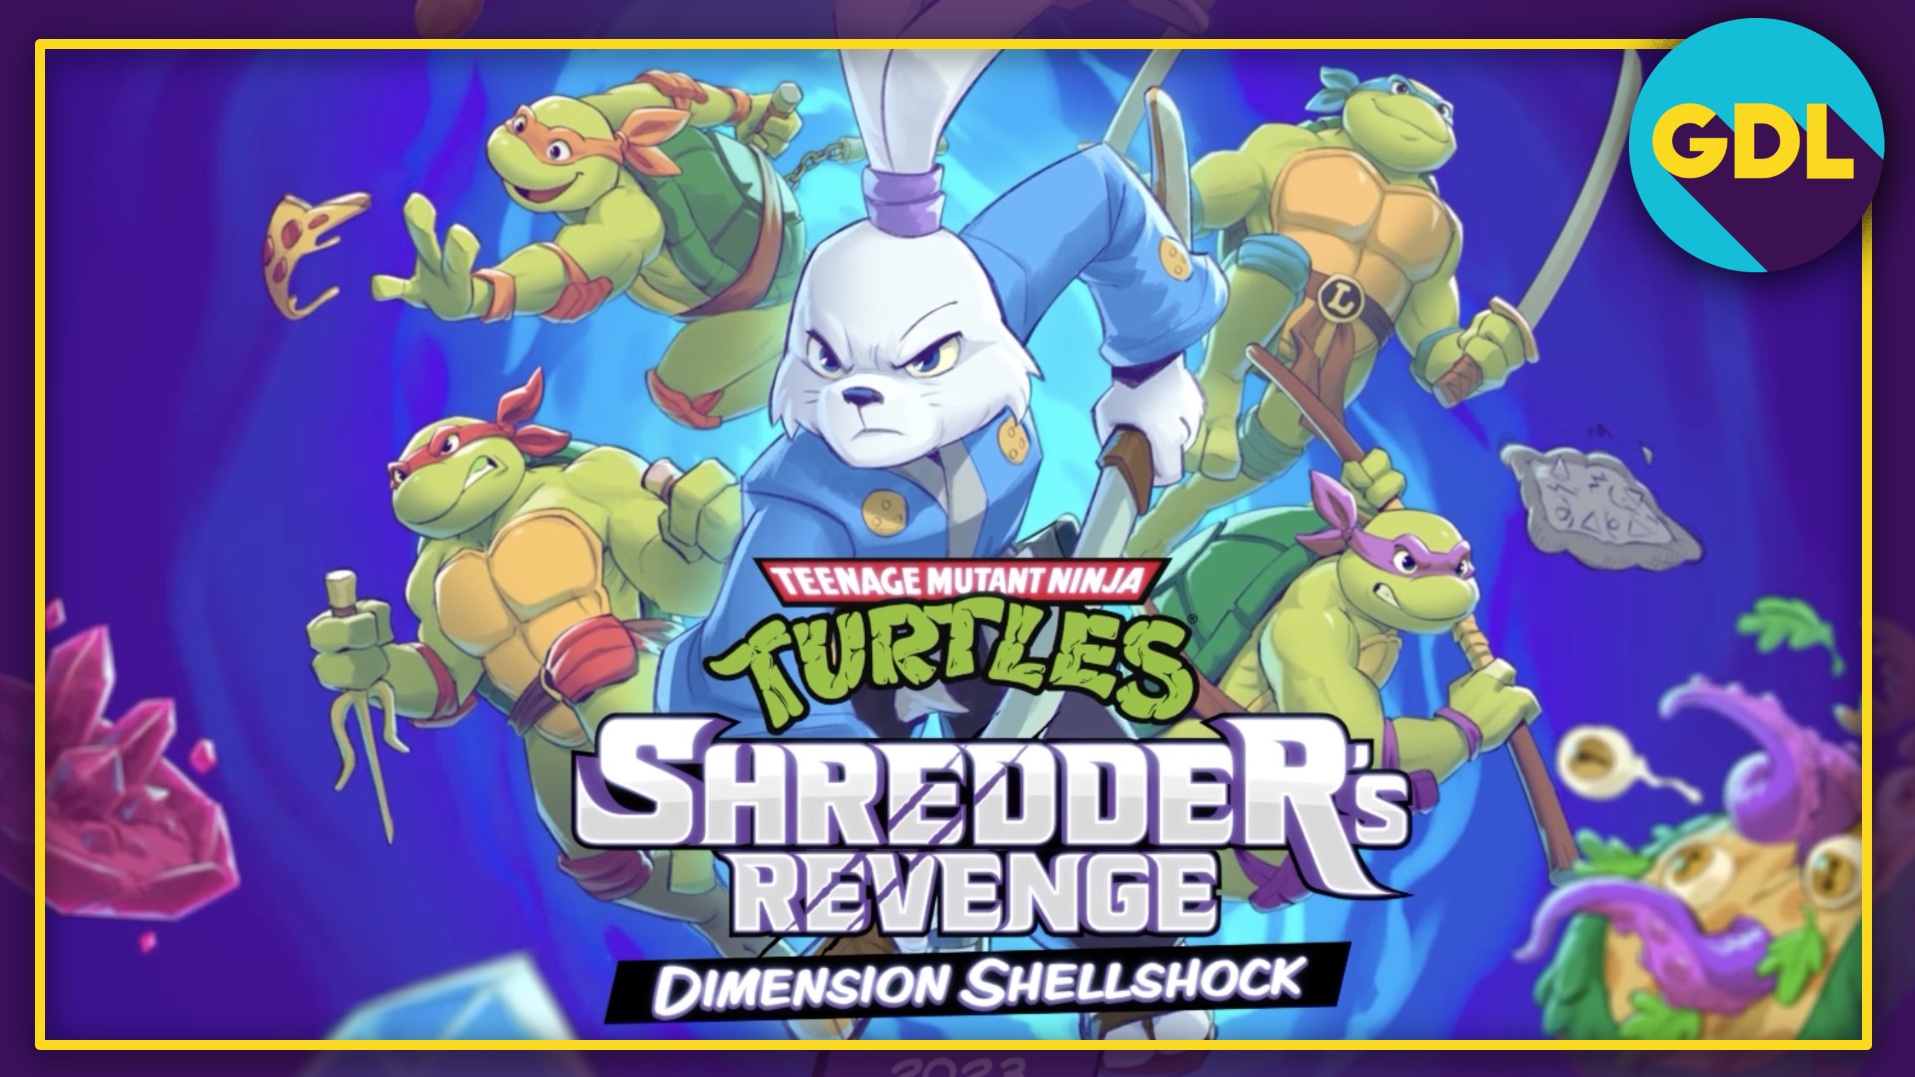 With the reveal of the Dimension Shellshock DLC and additional